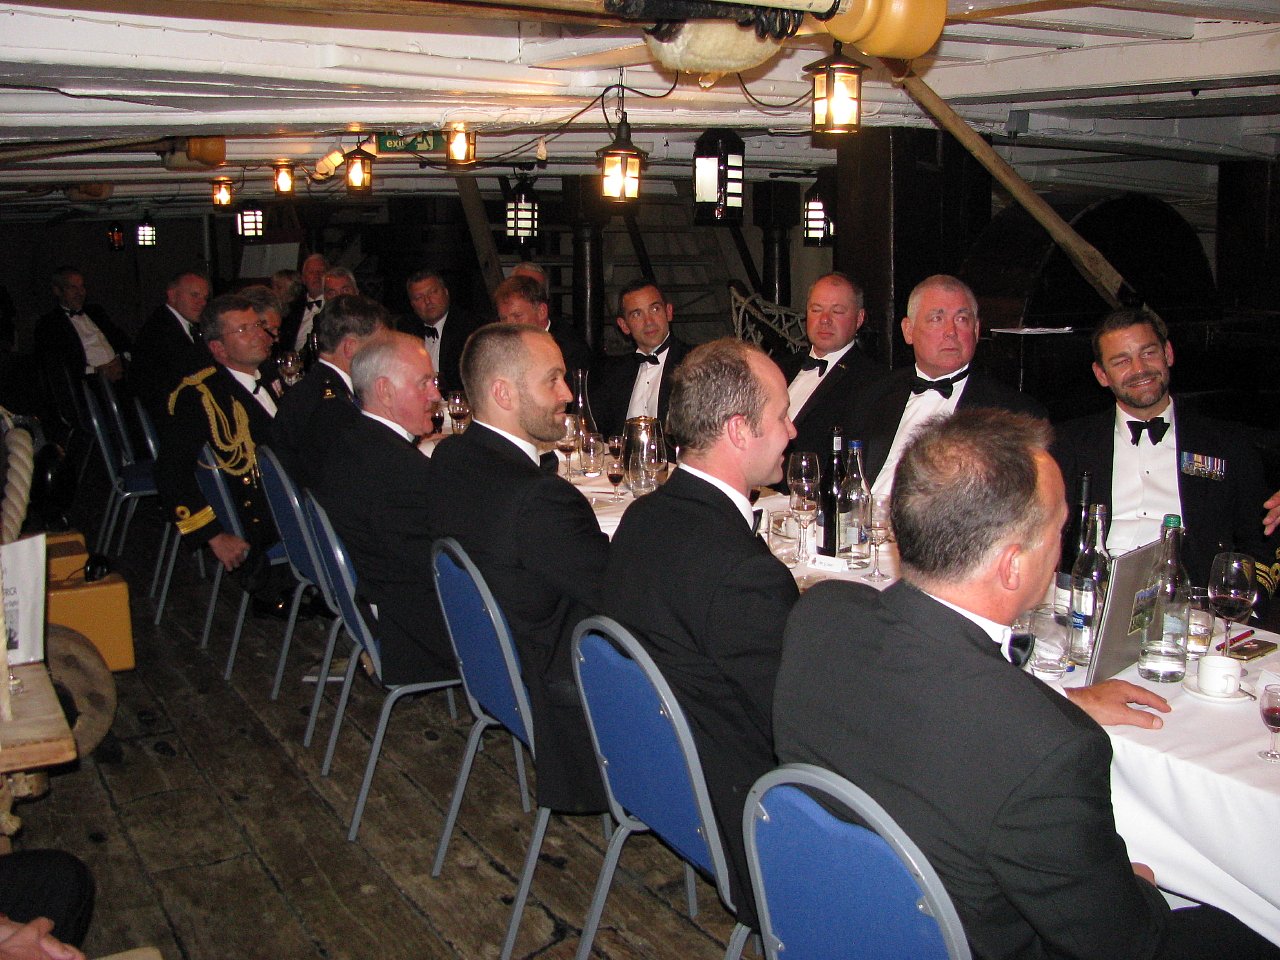 Project+Vernon+charity+dinner+on+board+HMS+Victory+11+Sep+2014+(82).jpg